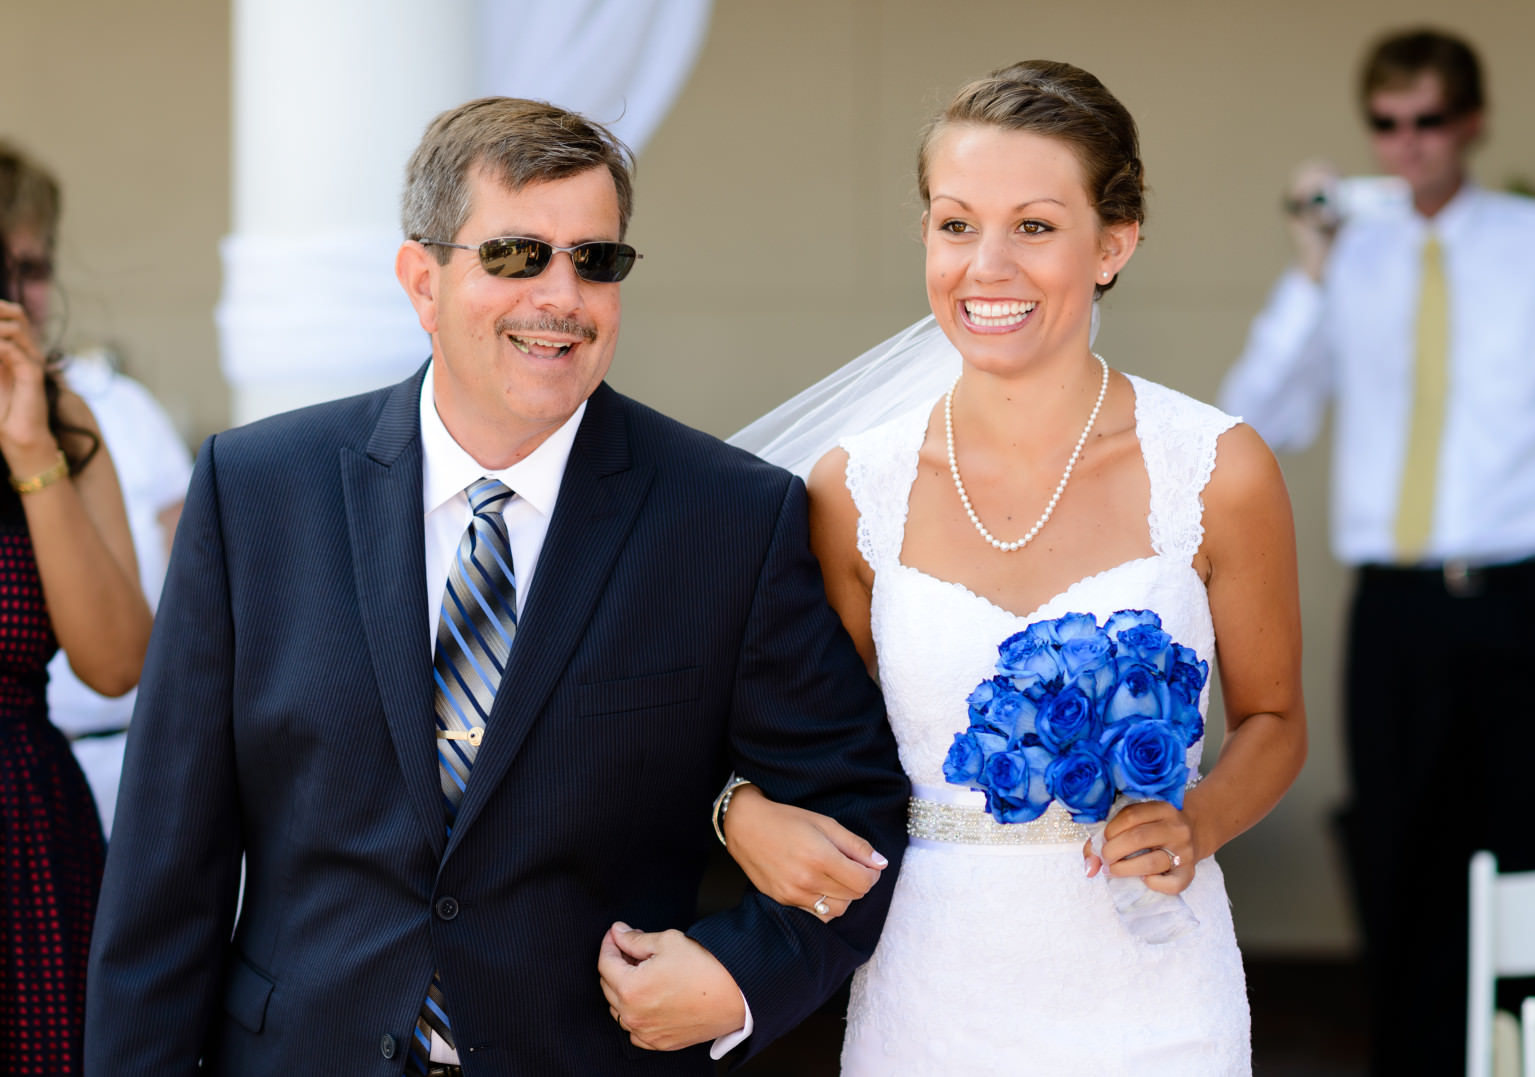 Bride looks very happy walking down isle with father